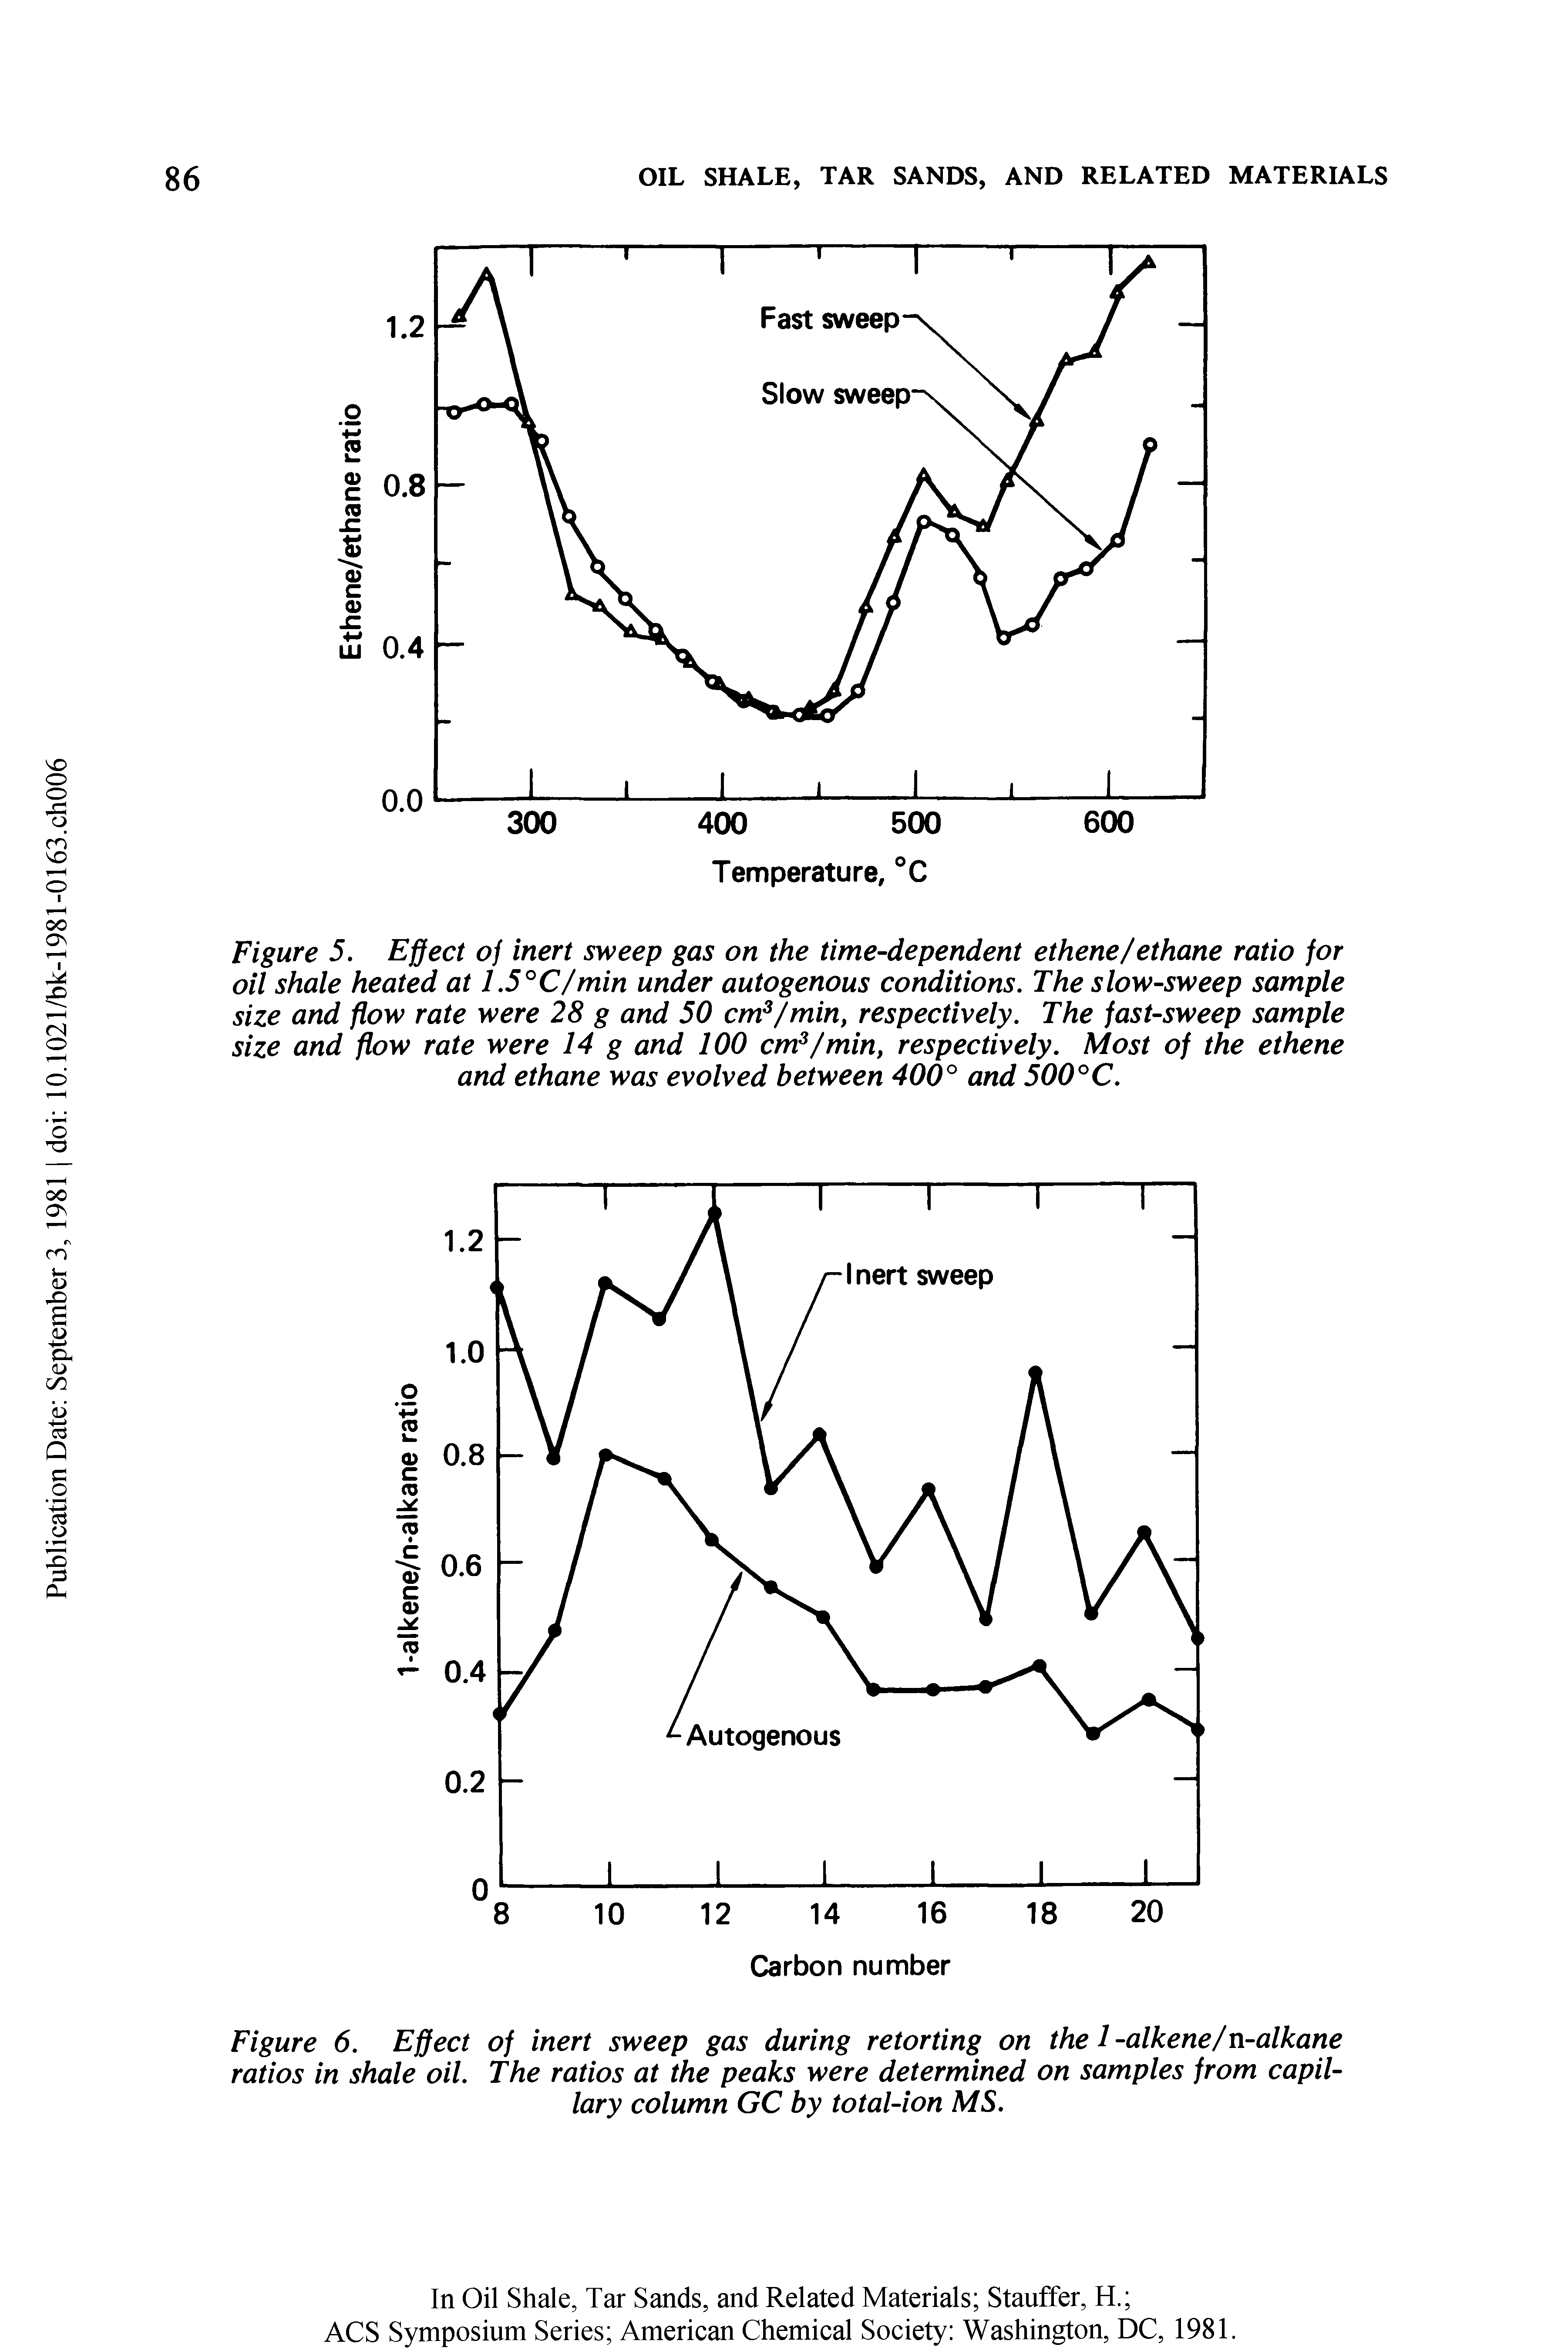 Figure 6. Effect of inert sweep gas during retorting on the 1 -alkene/n-alkane ratios in shale oil. The ratios at the peaks were determined on samples from capillary column GC by total-ion MS.